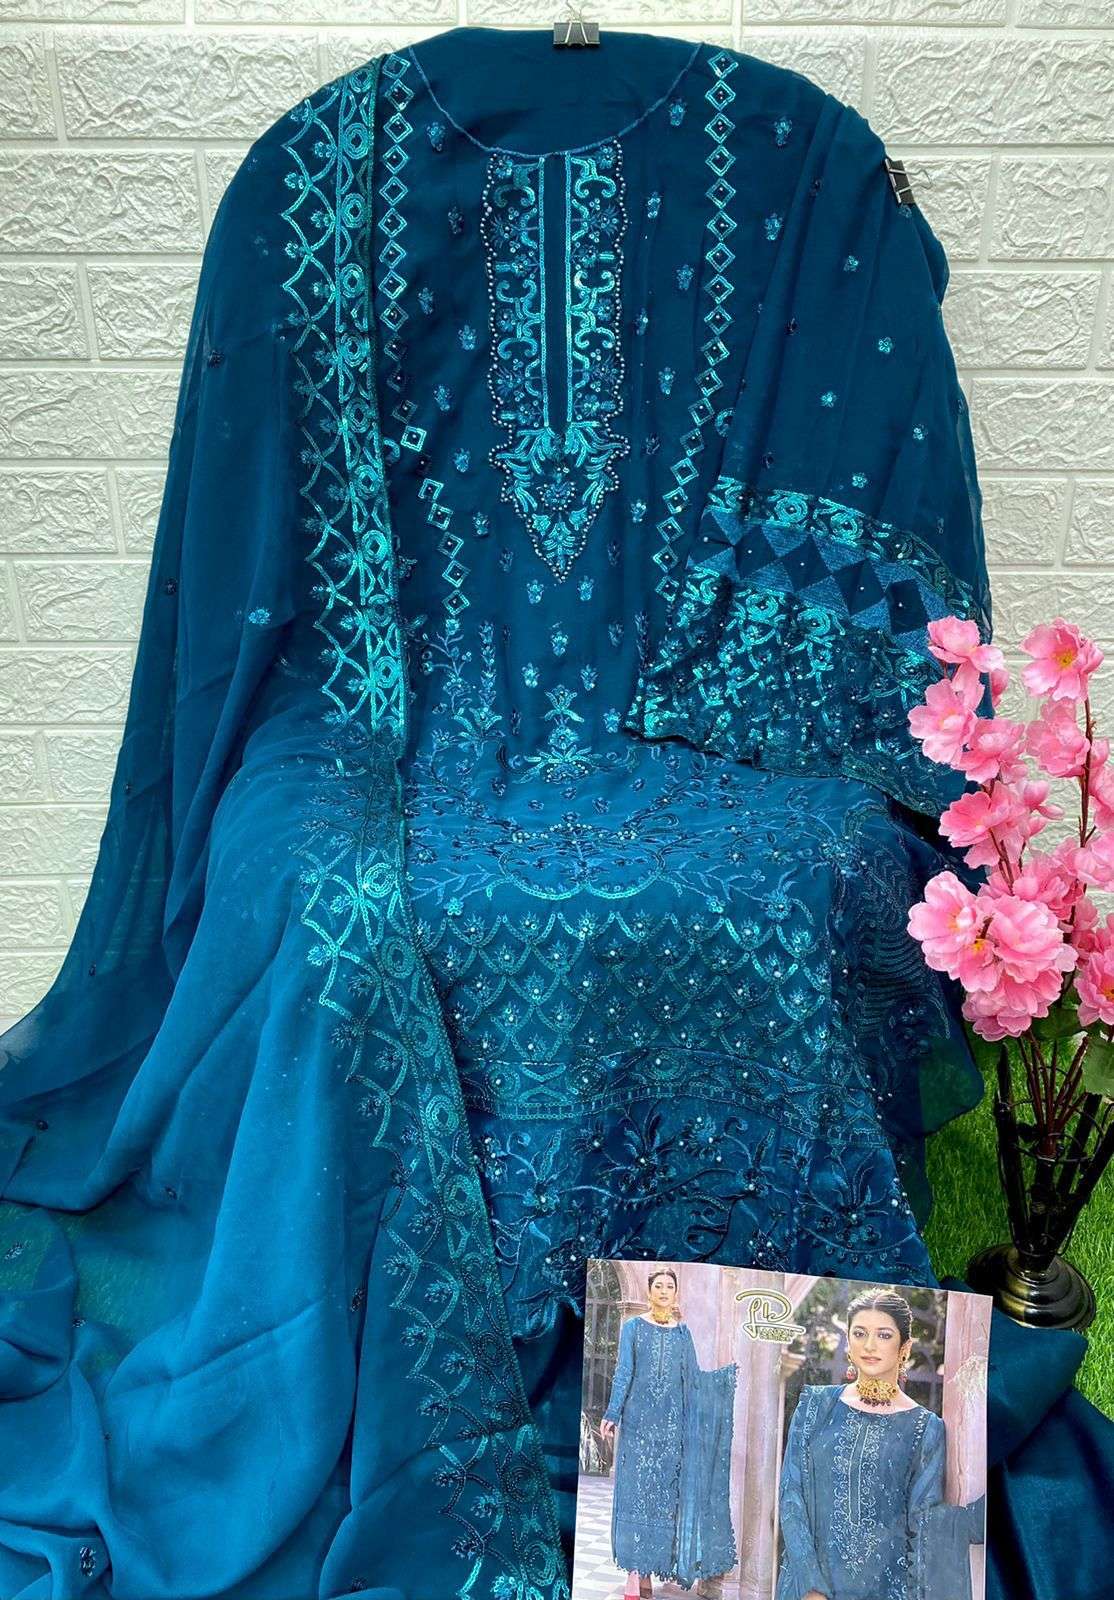 AAYARA 35 COLOURS BY LAAIBAH DESIGNER 35-A TO 35-D SERIES DESIGNER PAKISTANI SUITS COLLECTION BEAUTIFUL STYLISH COLORFUL FANCY PARTY WEAR & OCCASIONAL WEAR GEORGETTE DRESSES AT WHOLESALE PRICE